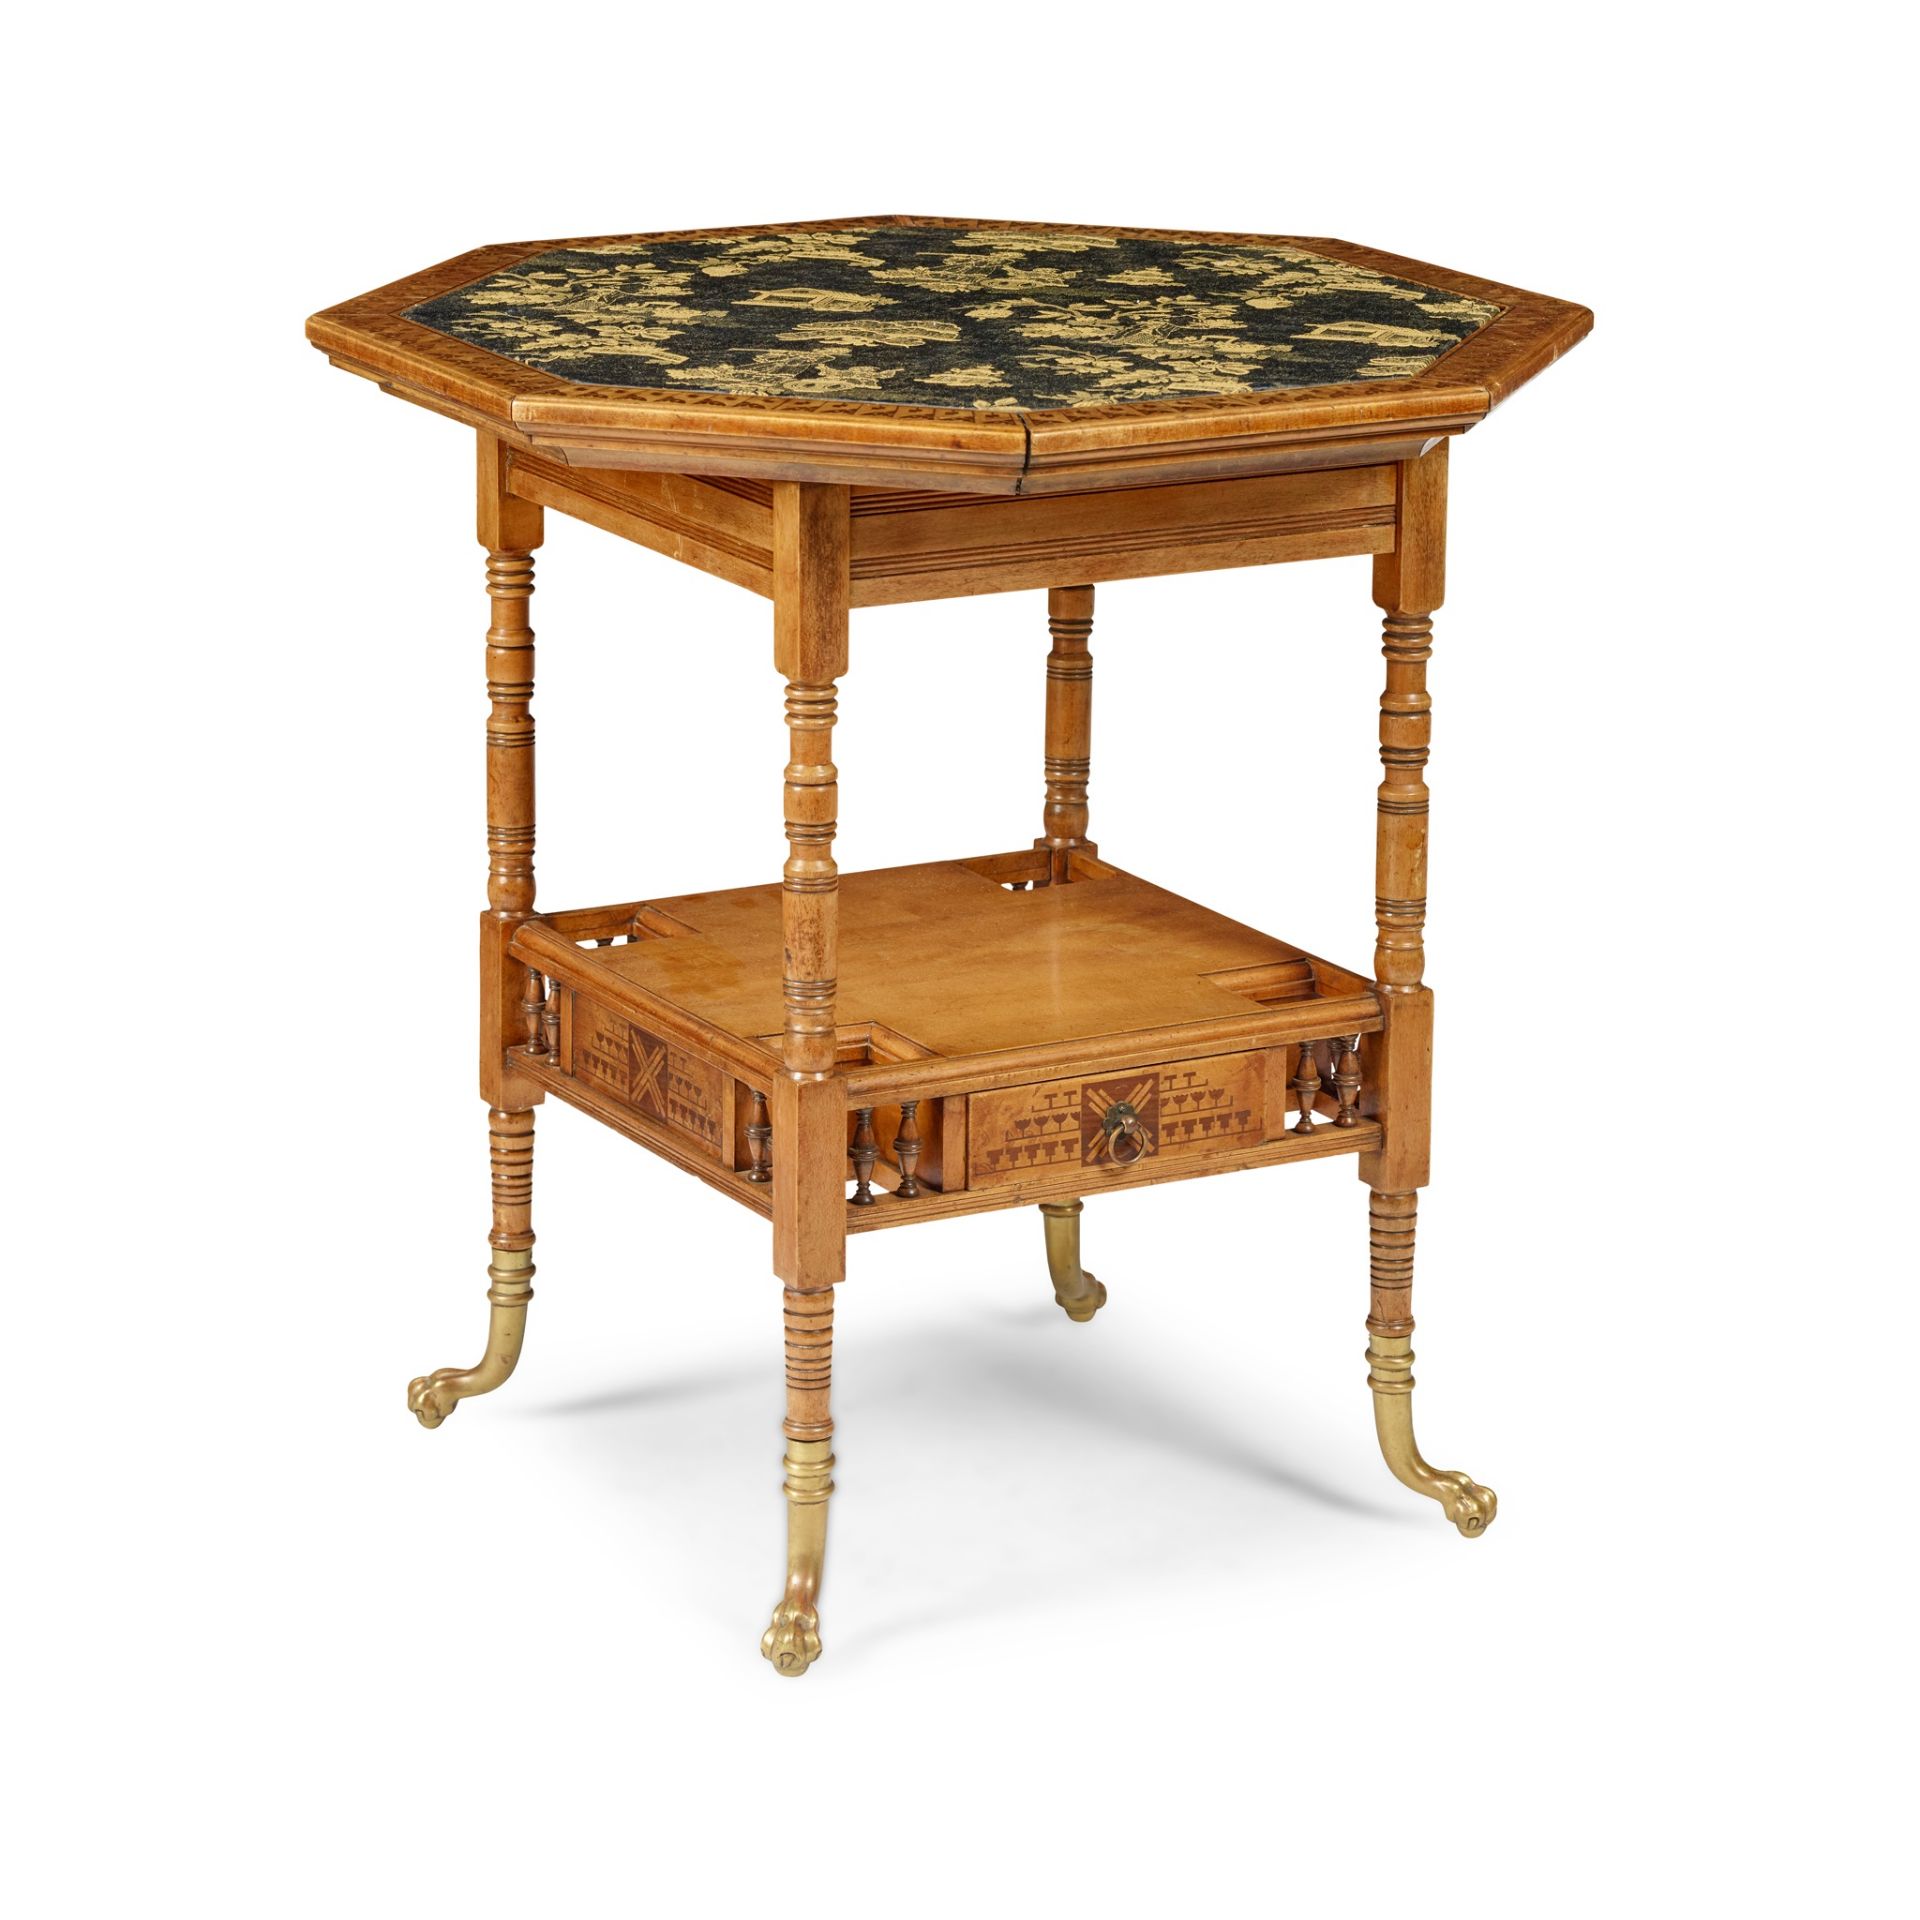 AMERICAN, MANNER OF E. W. GODWIN AESTHETIC MOVEMENT GAMES TABLE, CIRCA 1880 - Image 2 of 3